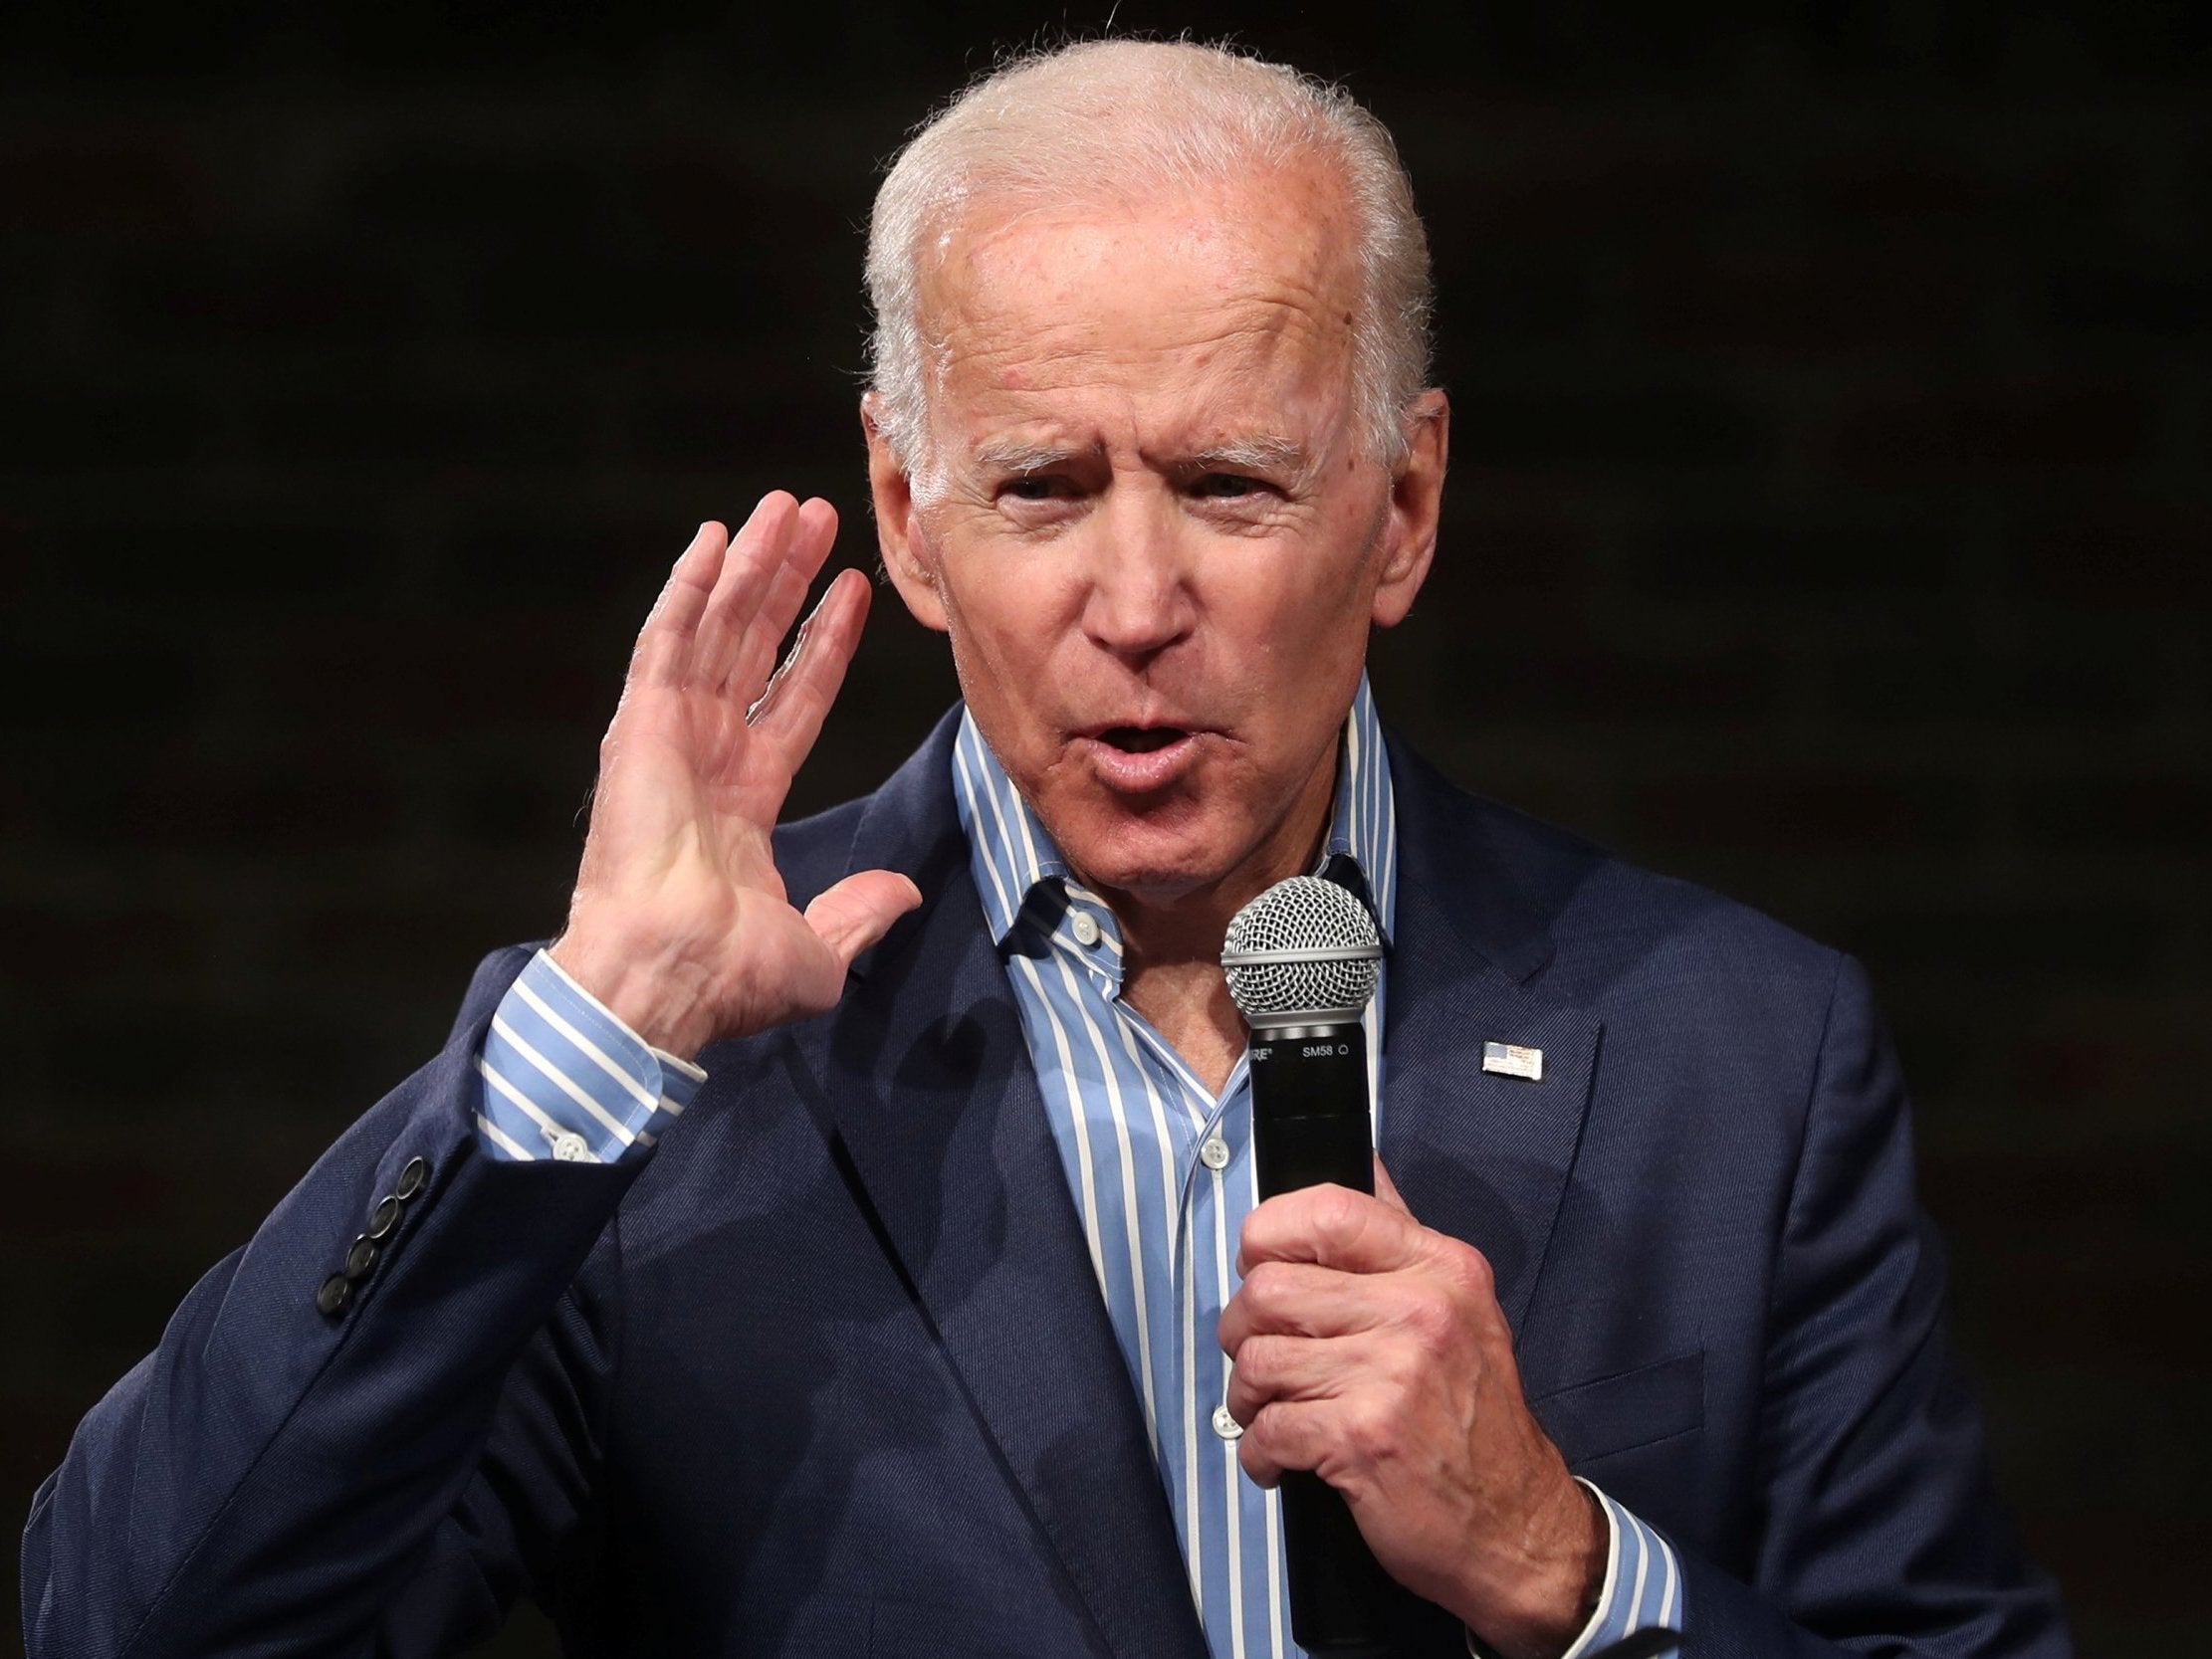 Mr Biden takes aim at the 'current vice president' for using religious freedom as 'a way to license discrimination broad areas and denying LGBT+ basic rights'